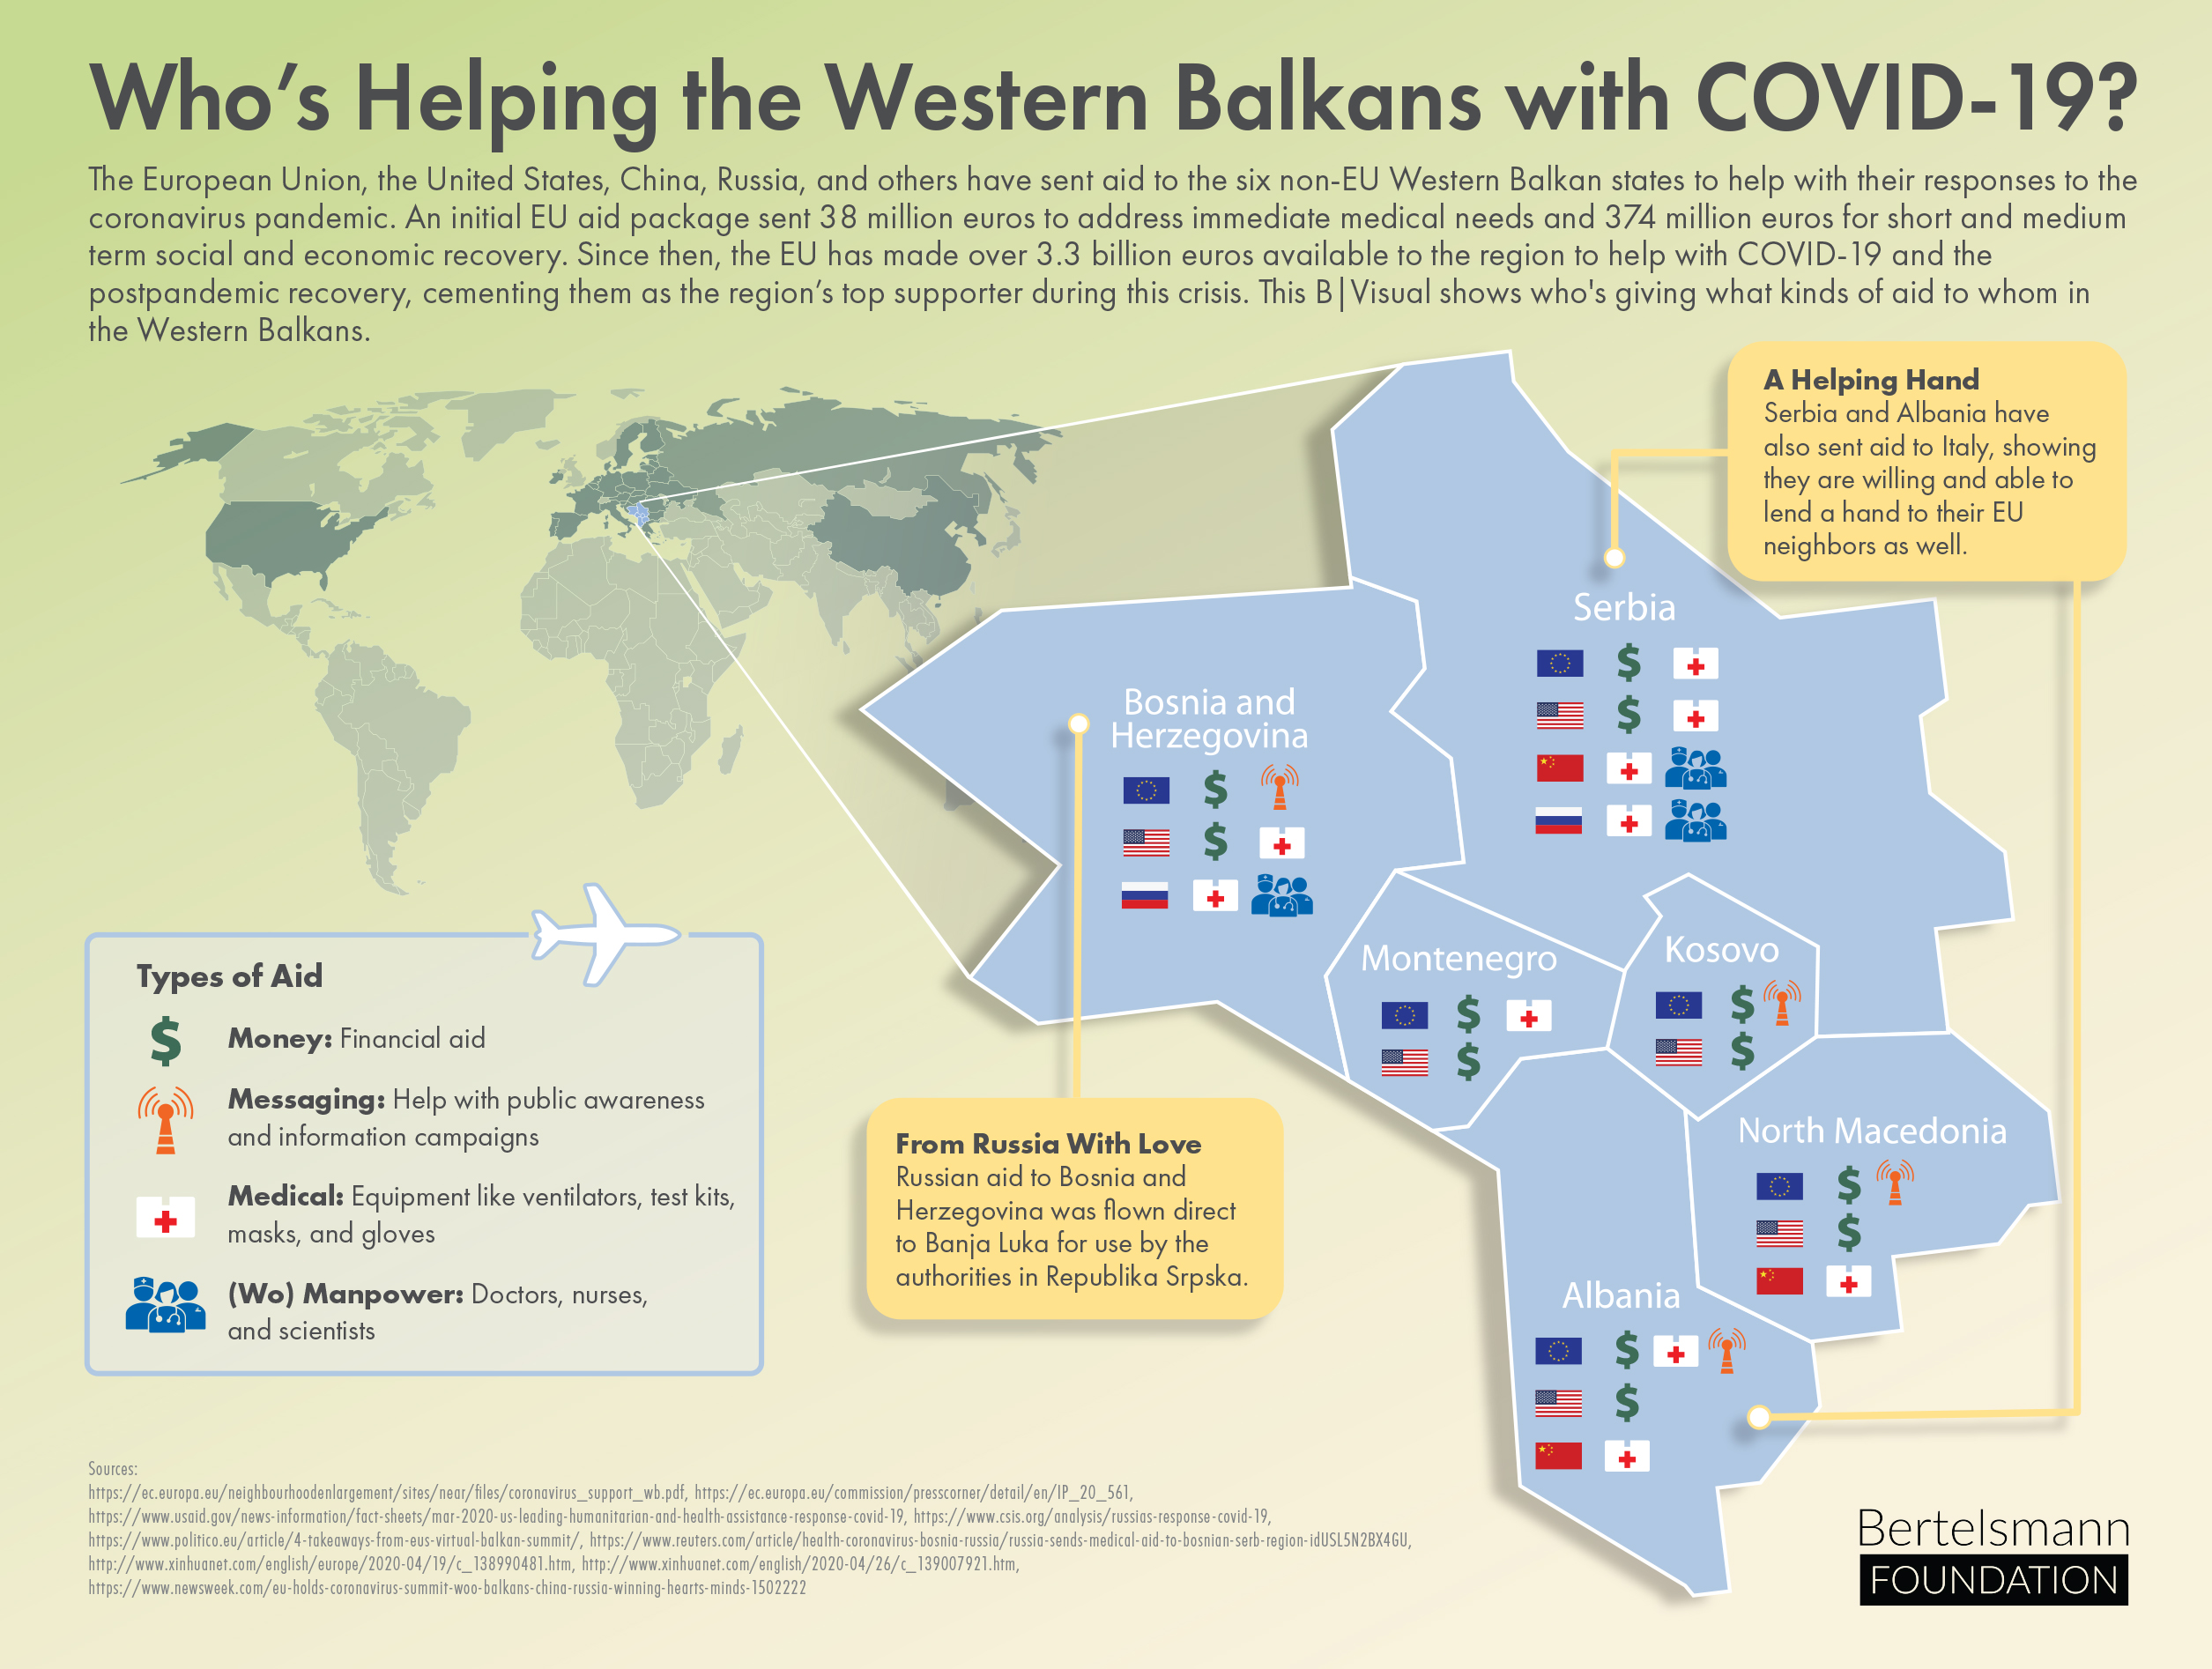 Who’s Helping the Western Balkans with COVID-19?